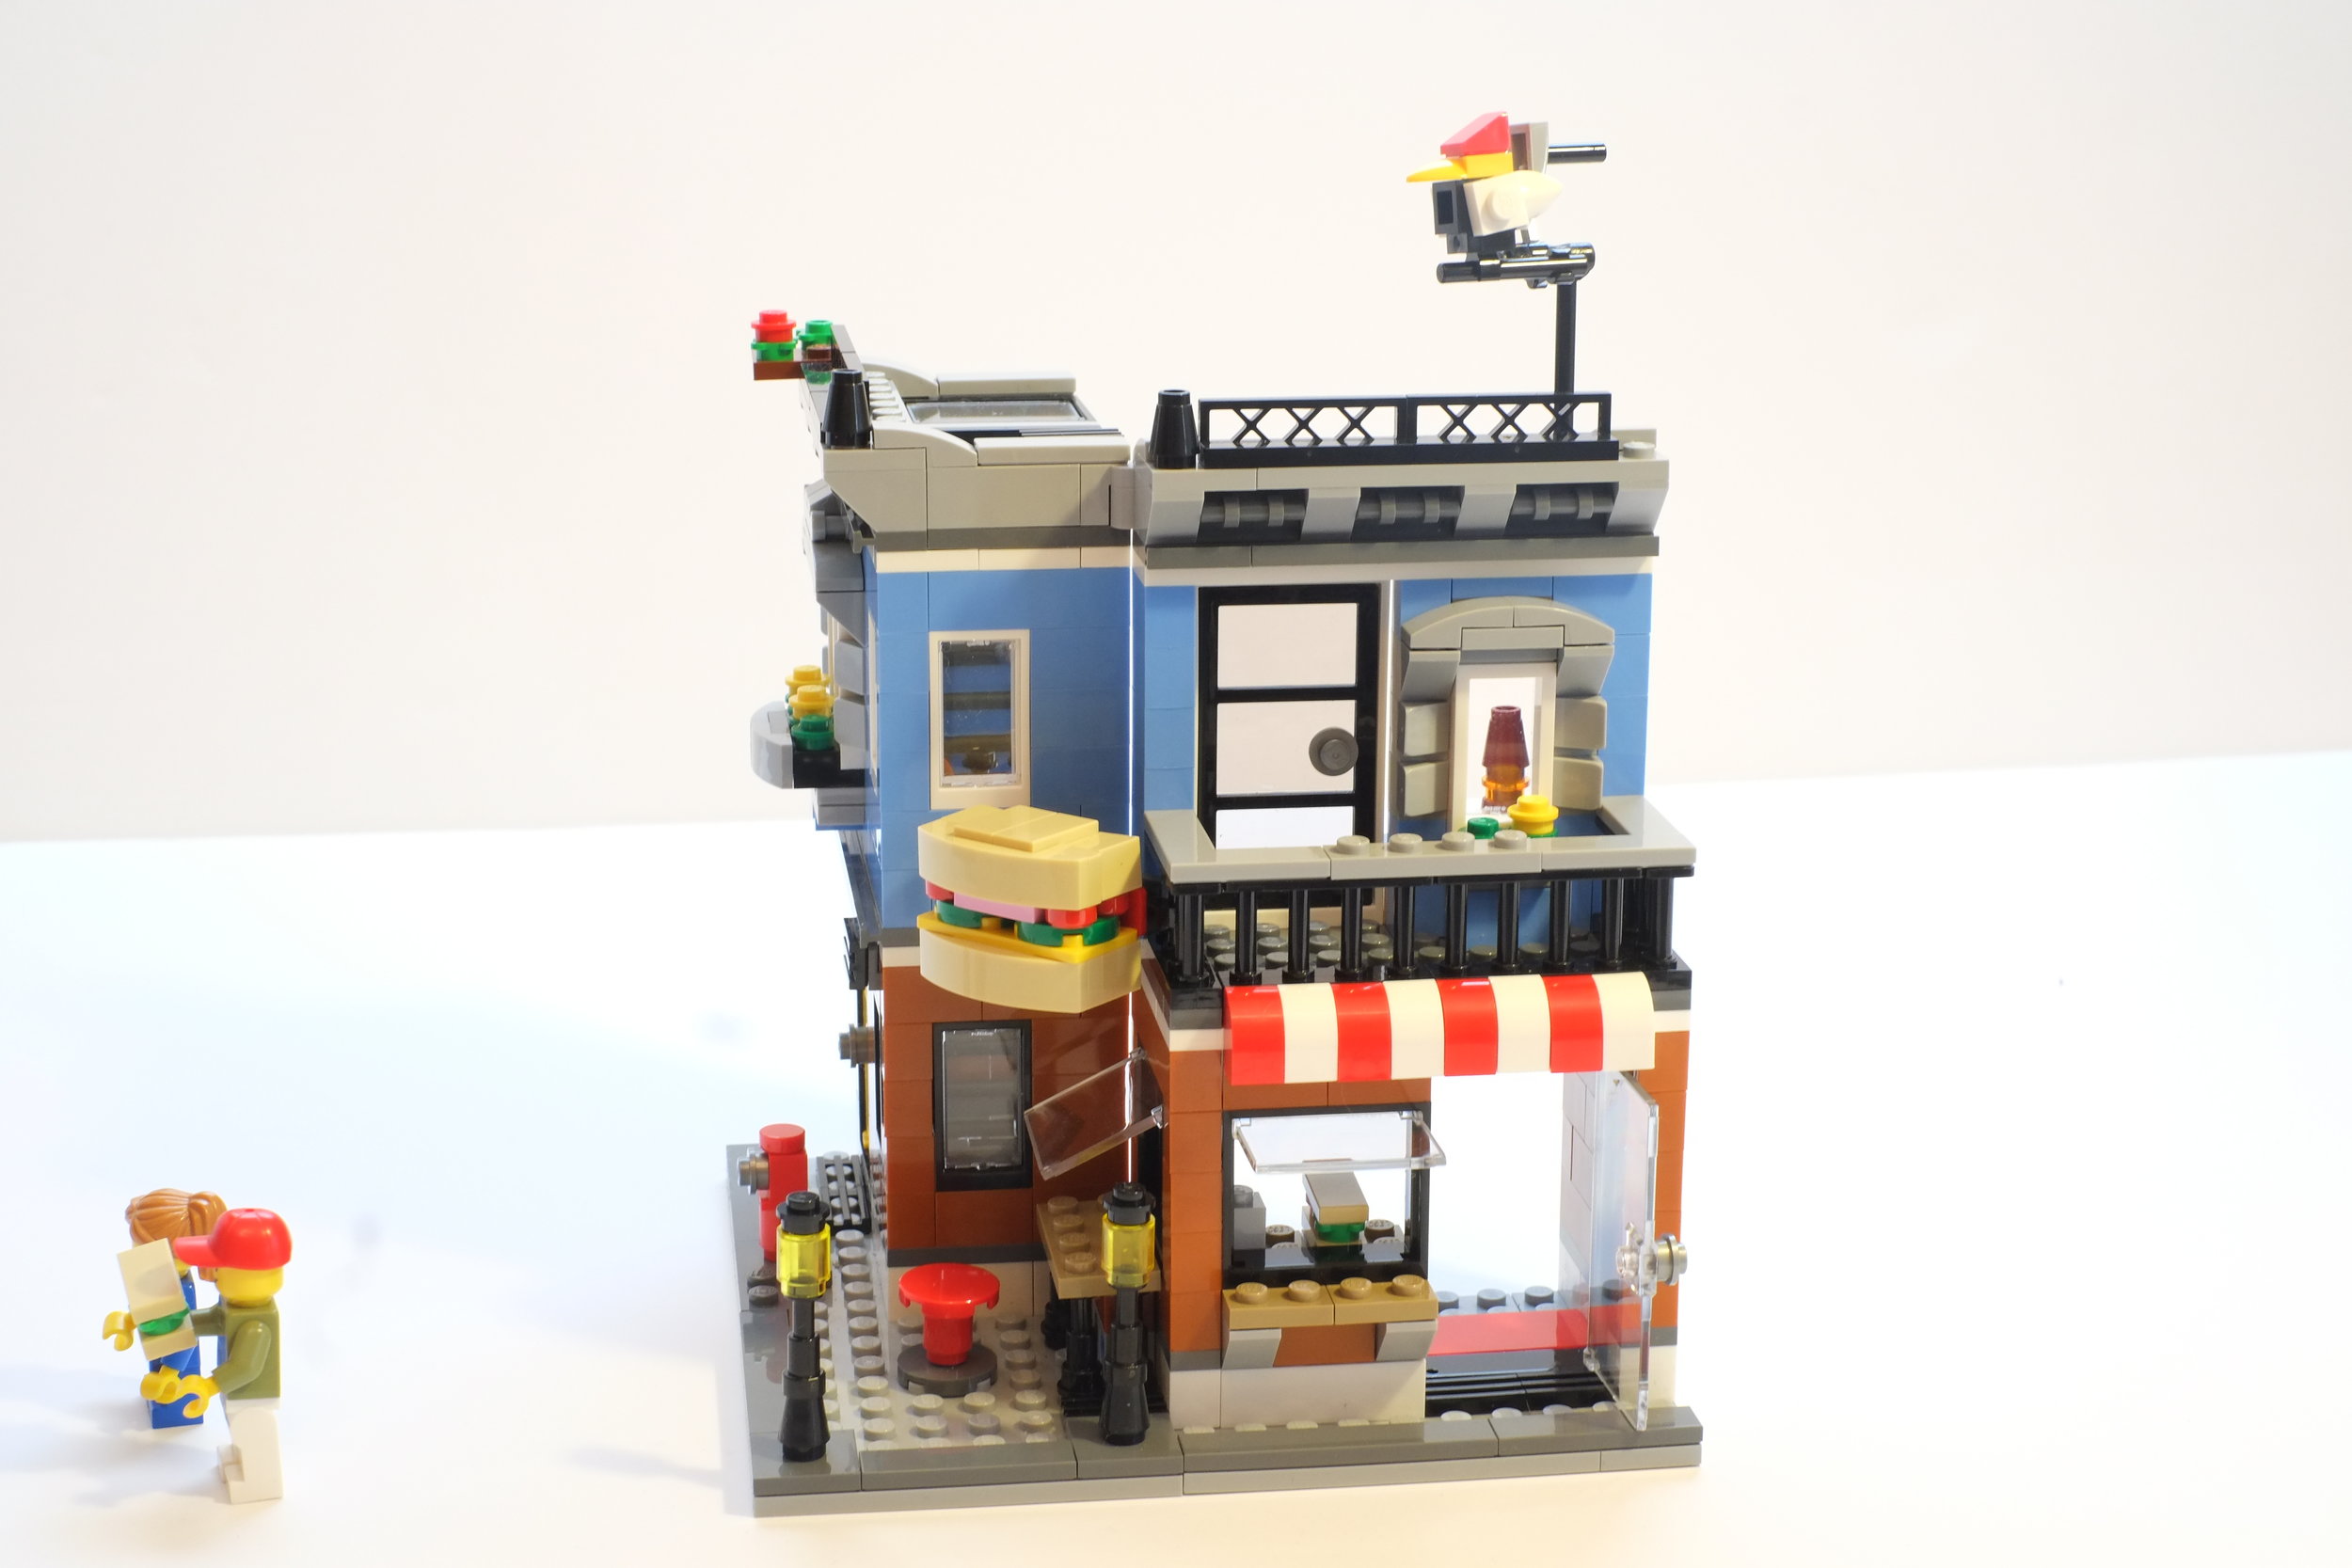 One of Heistheway's hundreds of photos for the stop-motion LEGO contest